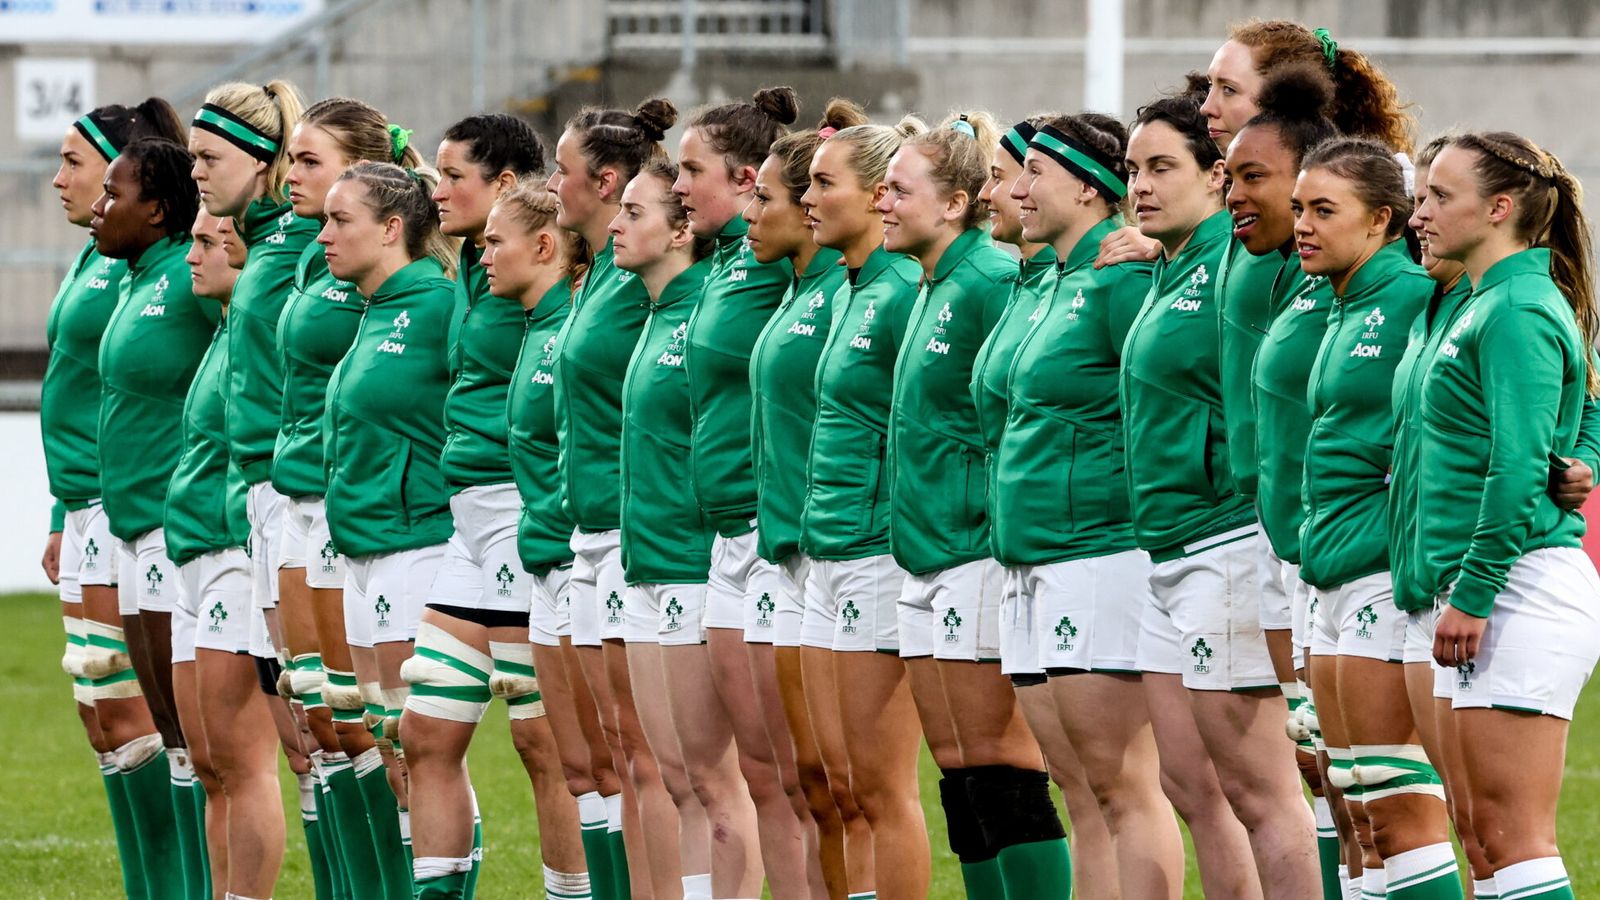 Irish Rugby Football Union Announce 43 Professional Contracts For Women